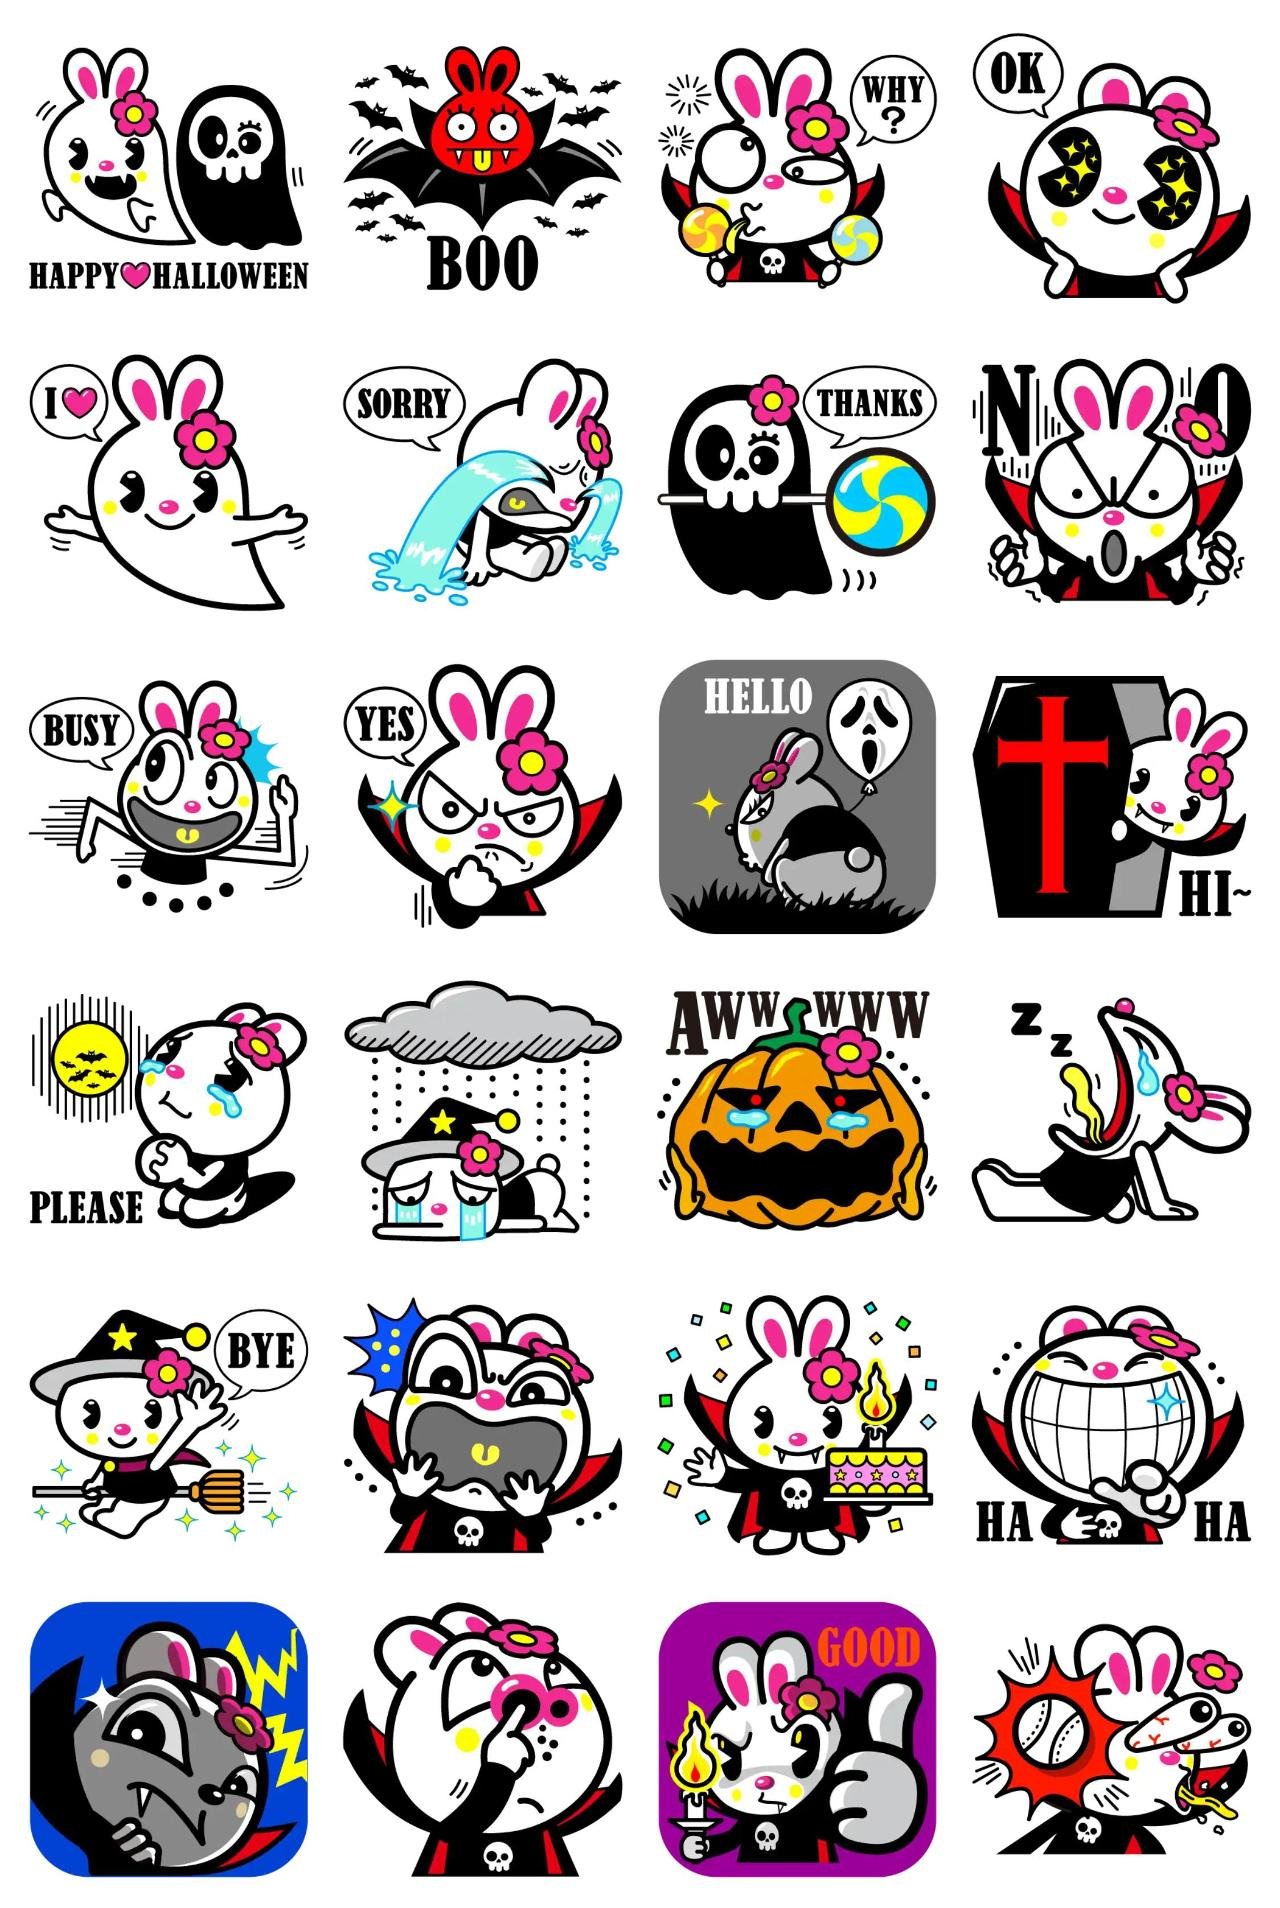 Happy Halloween with Hipani Animals,Phrases sticker pack for Whatsapp, Telegram, Signal, and others chatting and message apps